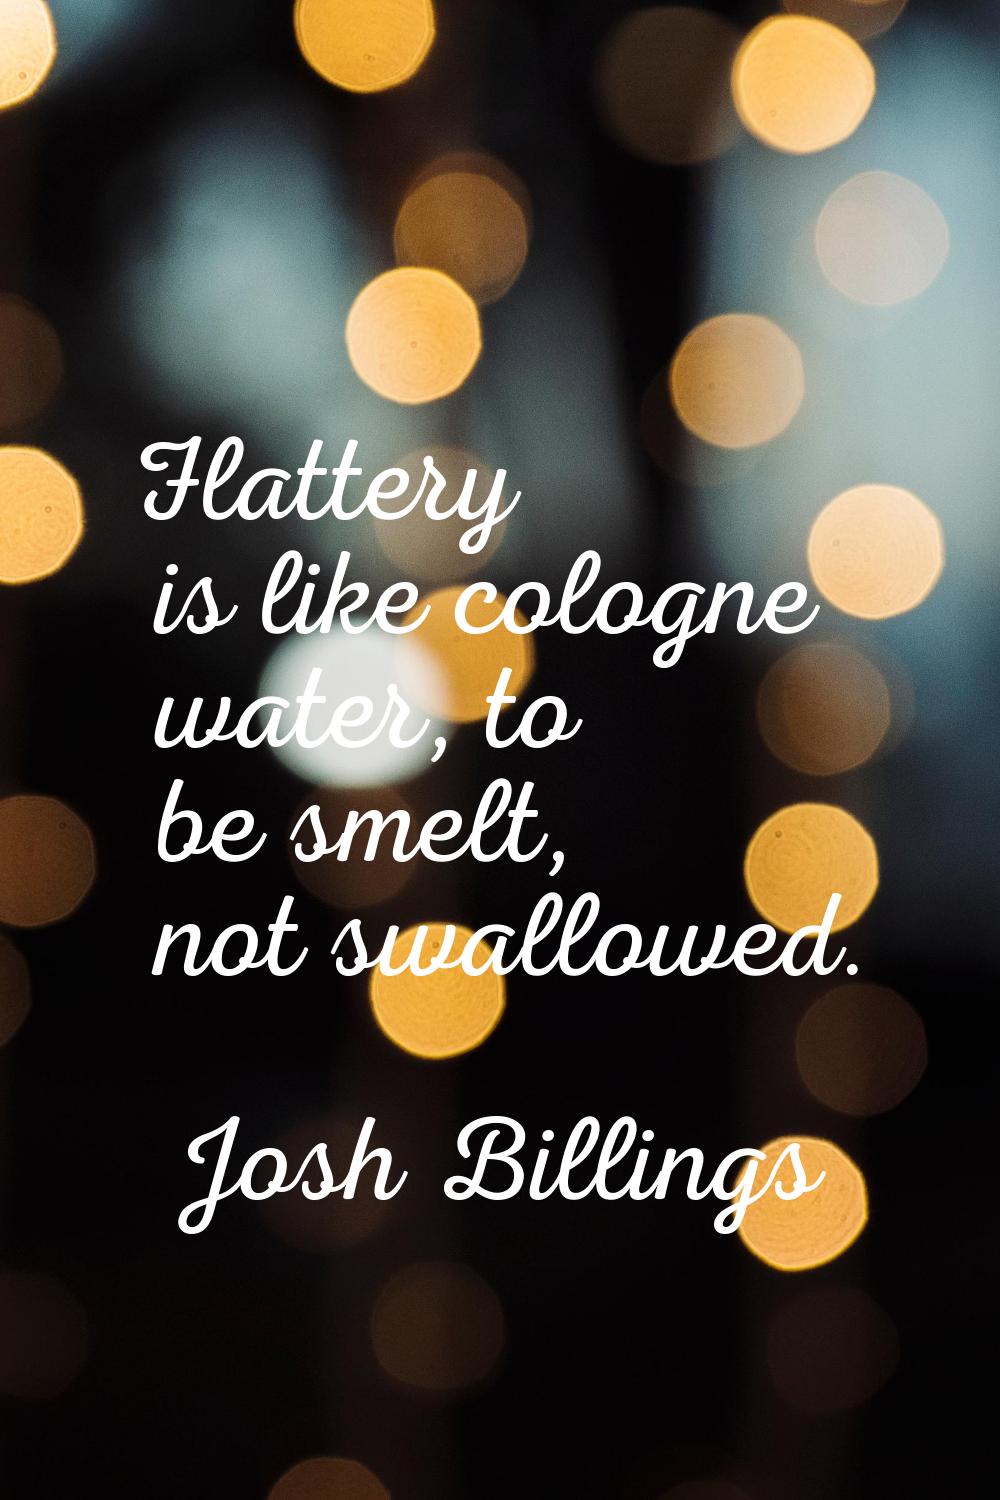 Flattery is like cologne water, to be smelt, not swallowed.